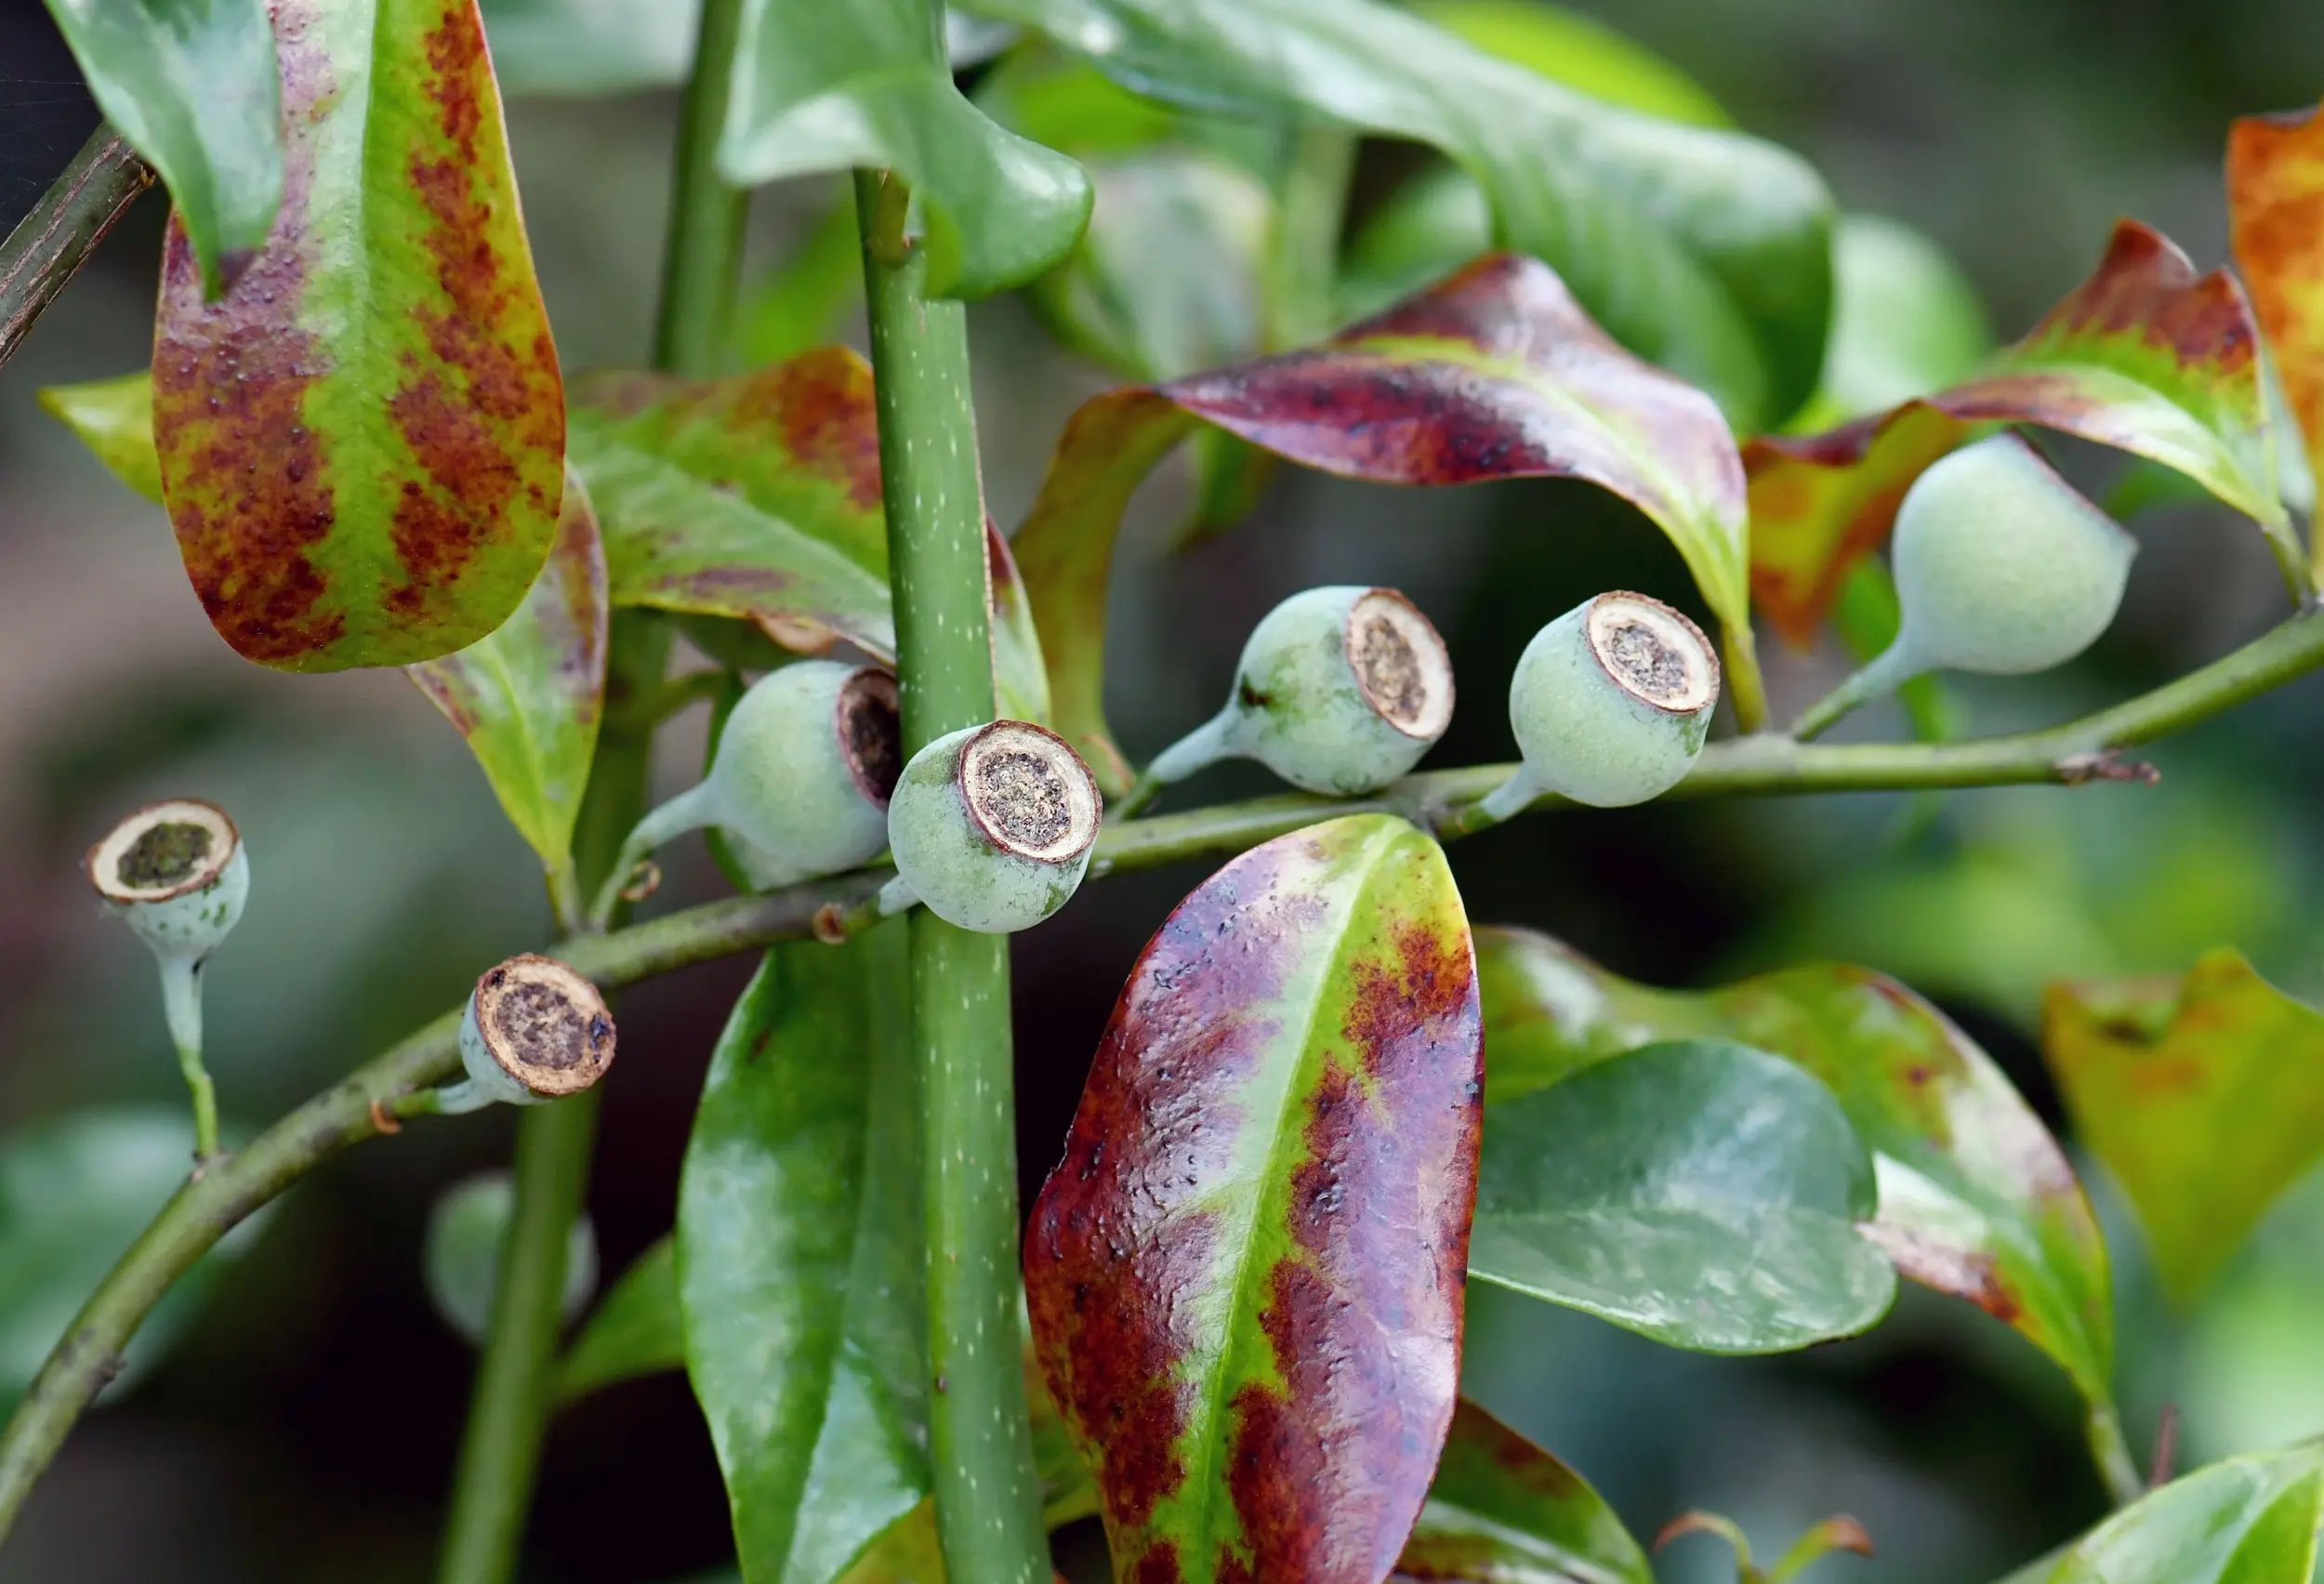 An image displaying the young Bolwarra fruit - the fruit depicted look similar to gumnuts. The surrounding leaves are a mix of a red-brown and green. 